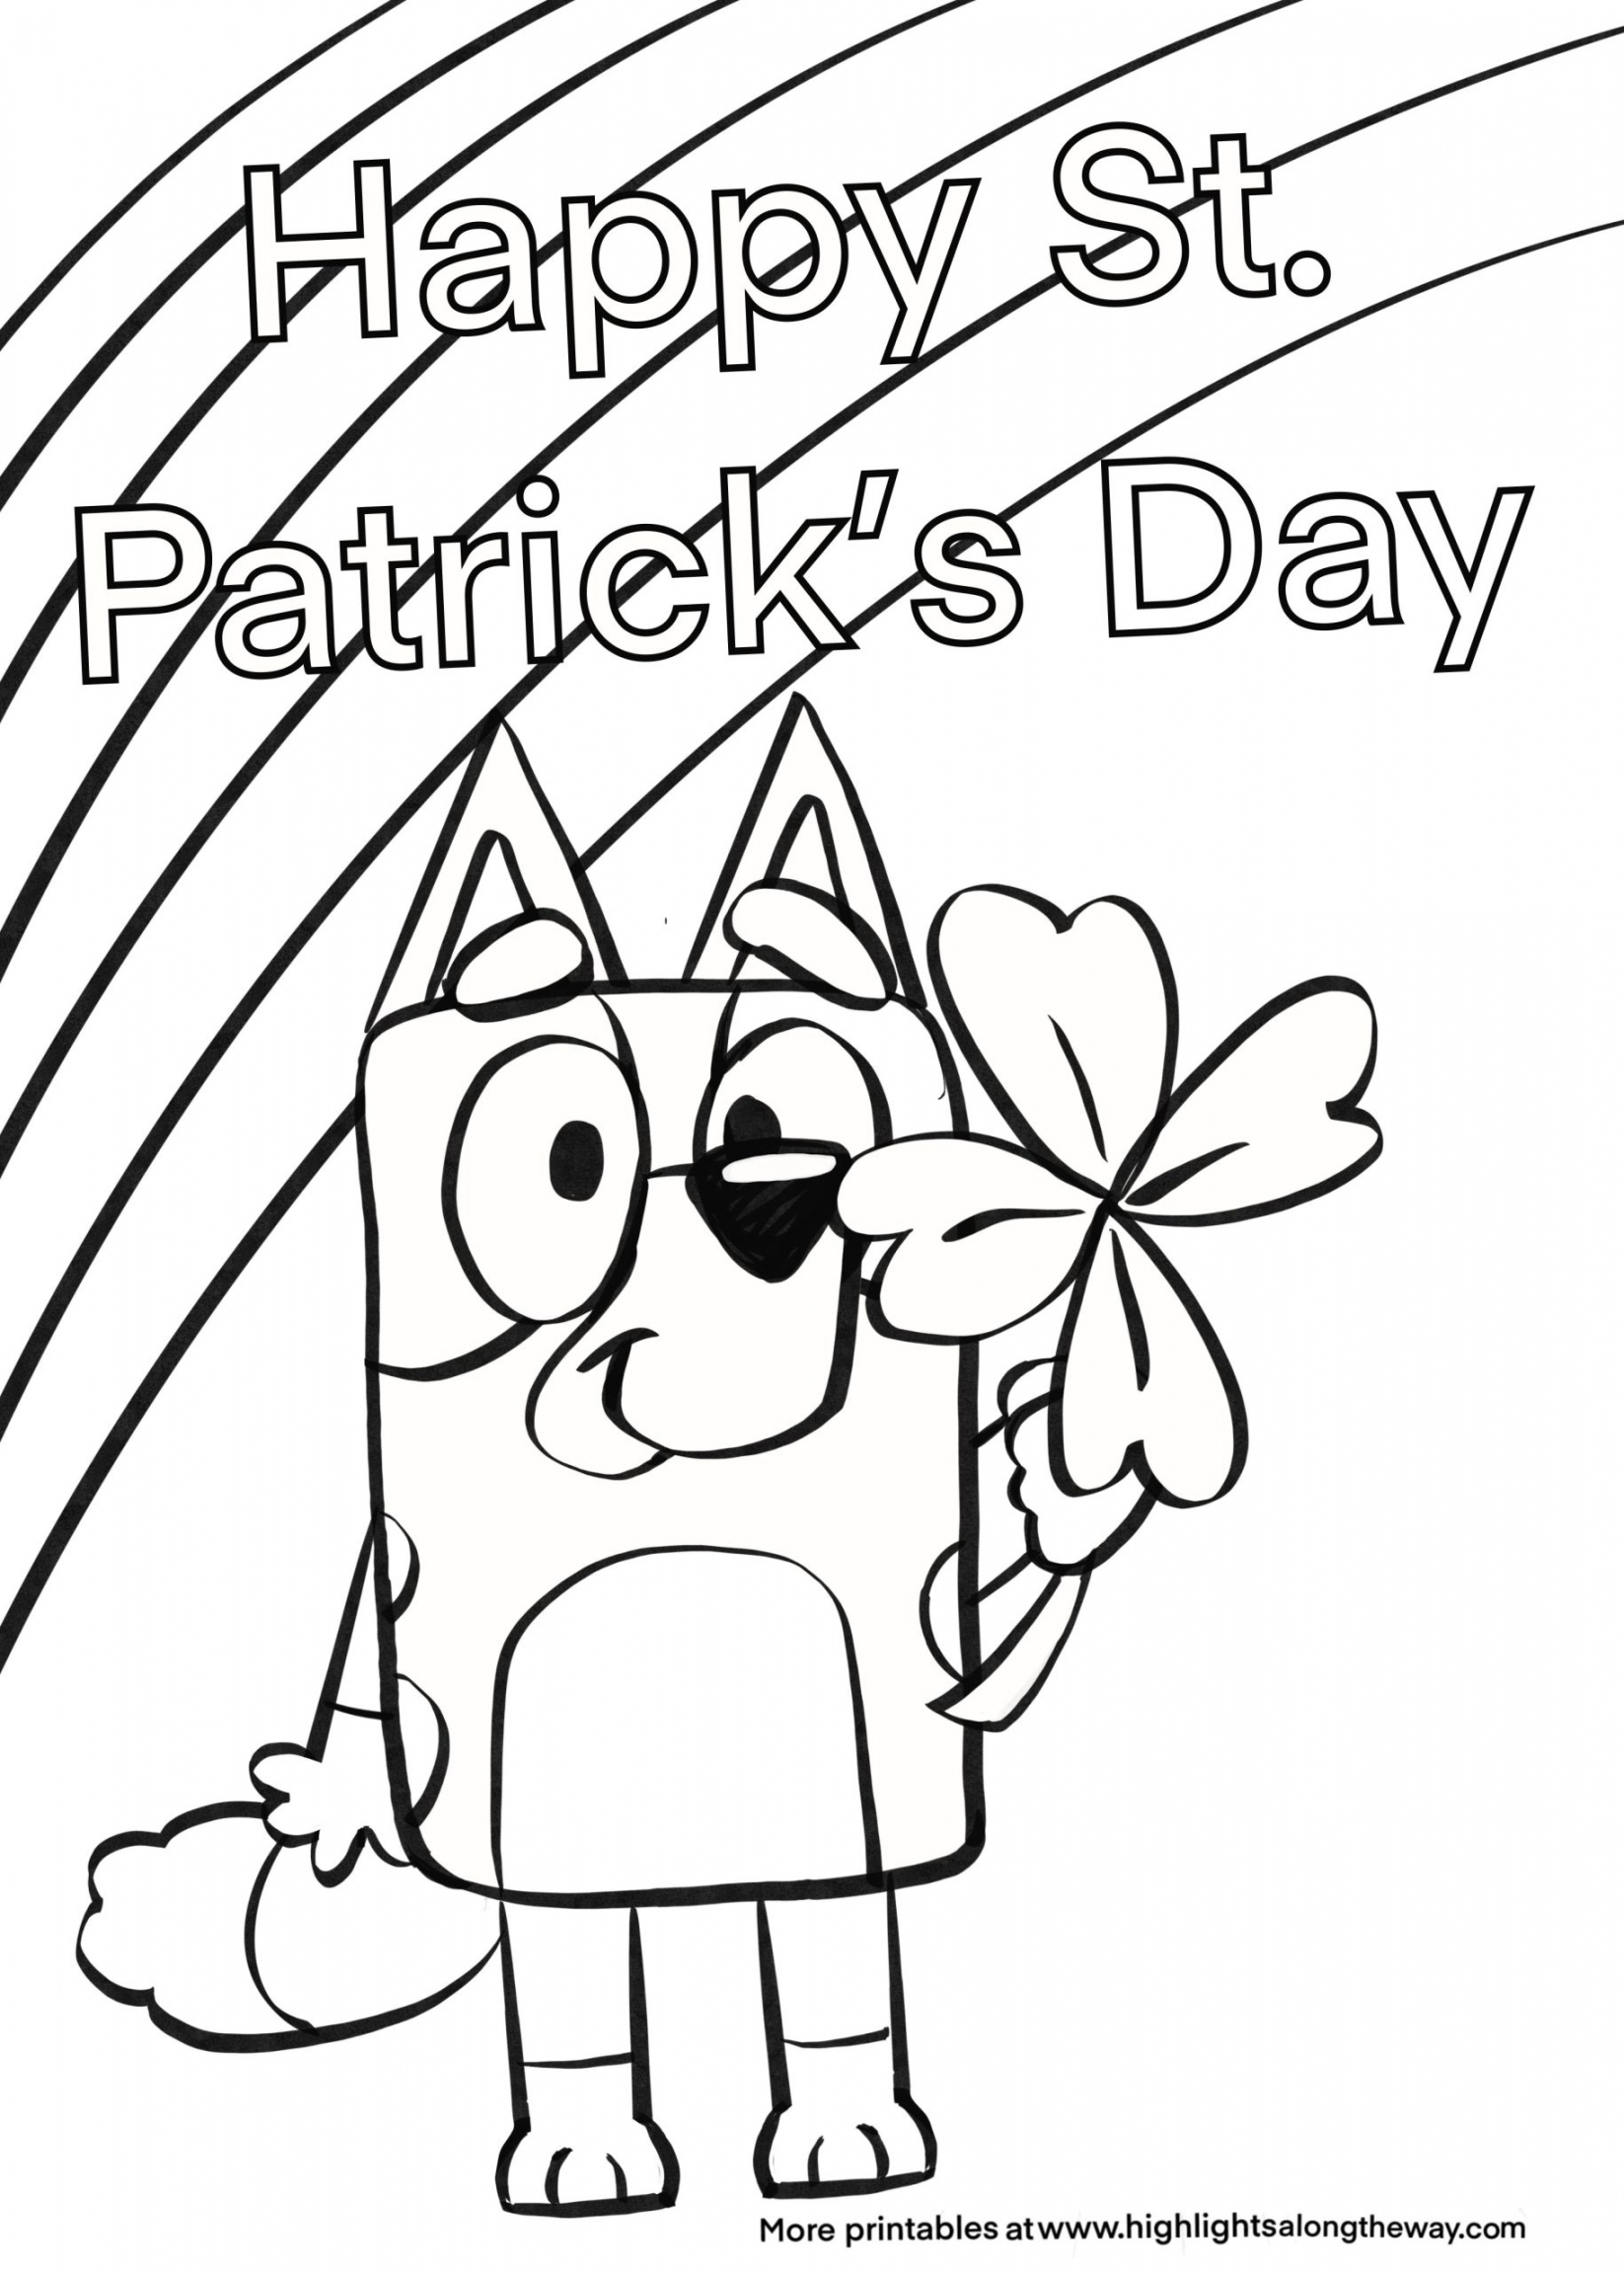 Free Printable St Patricks Day Coloring Pages - Printable - Bluey St